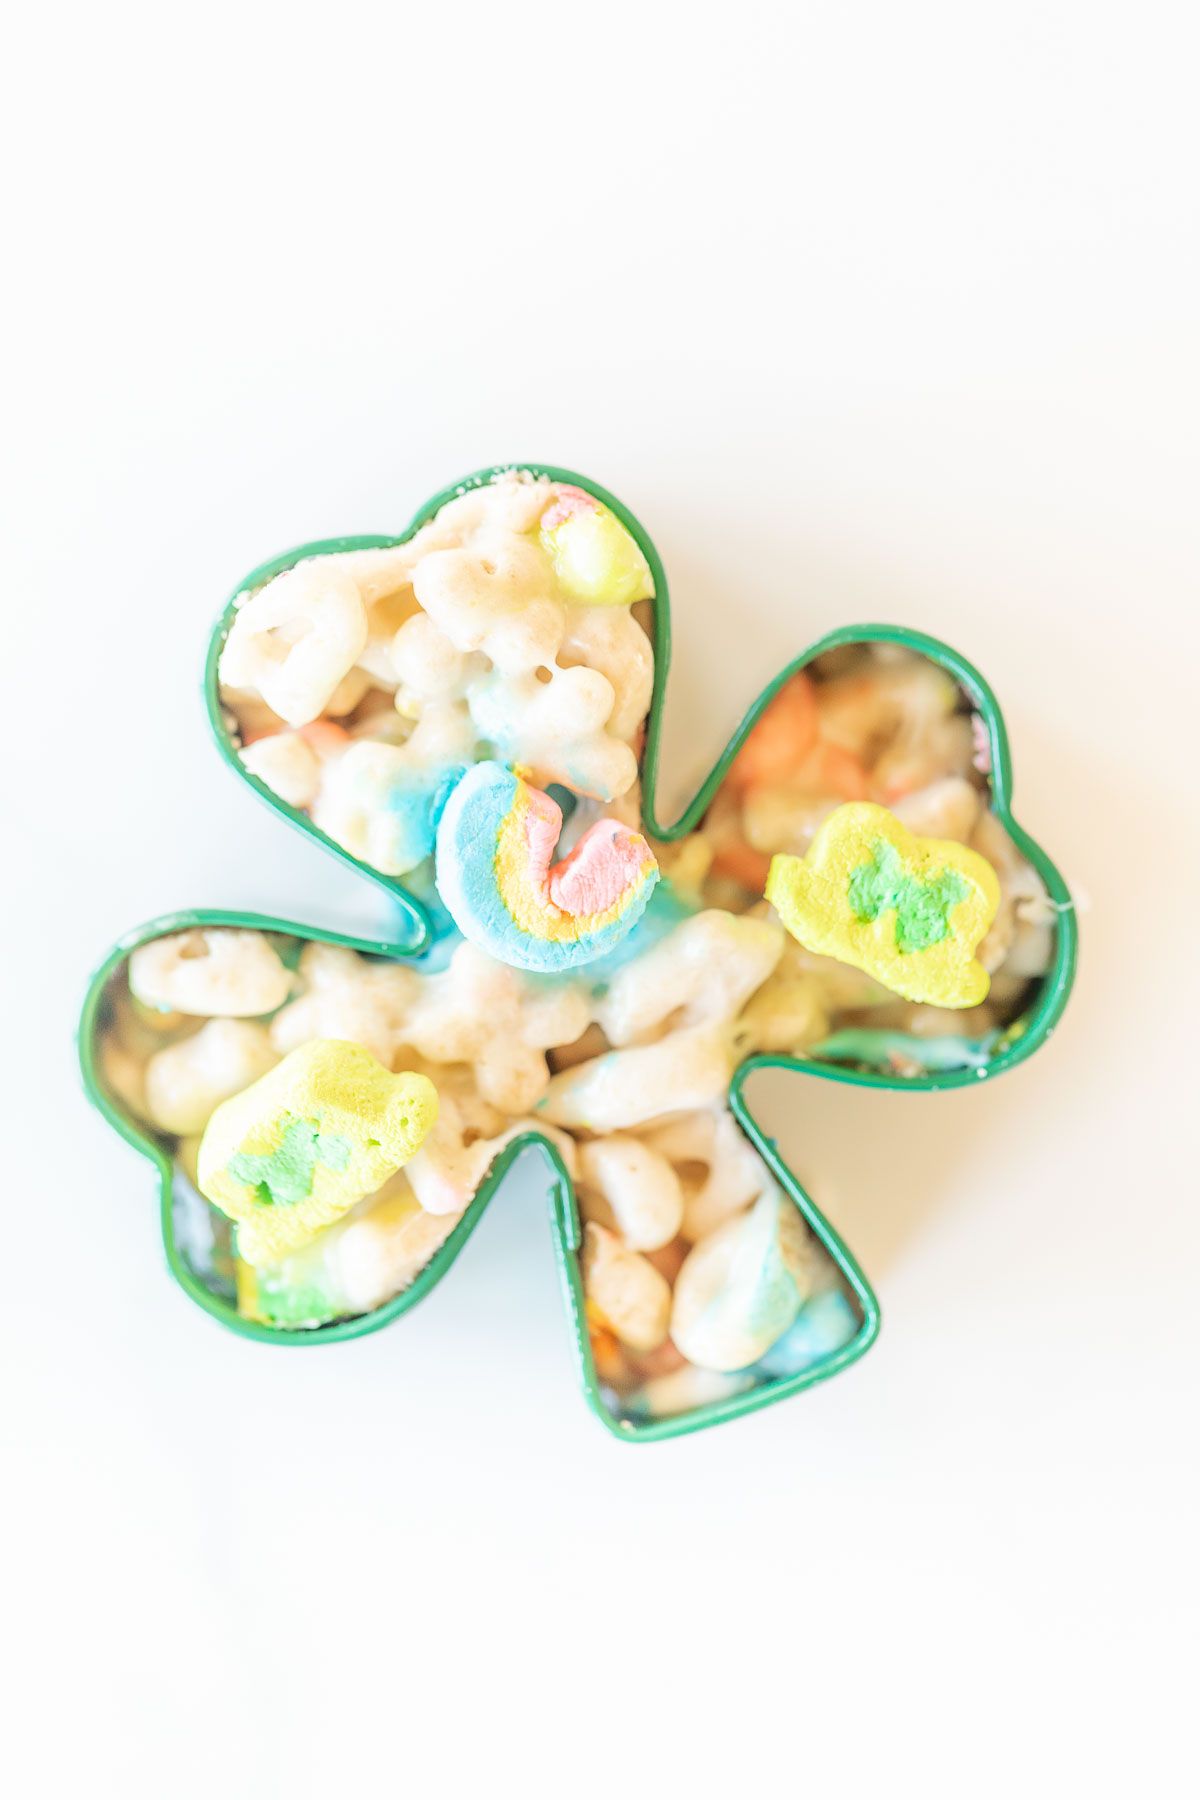 Lucky charm bars cut into clovers and placed on a marble countertop.